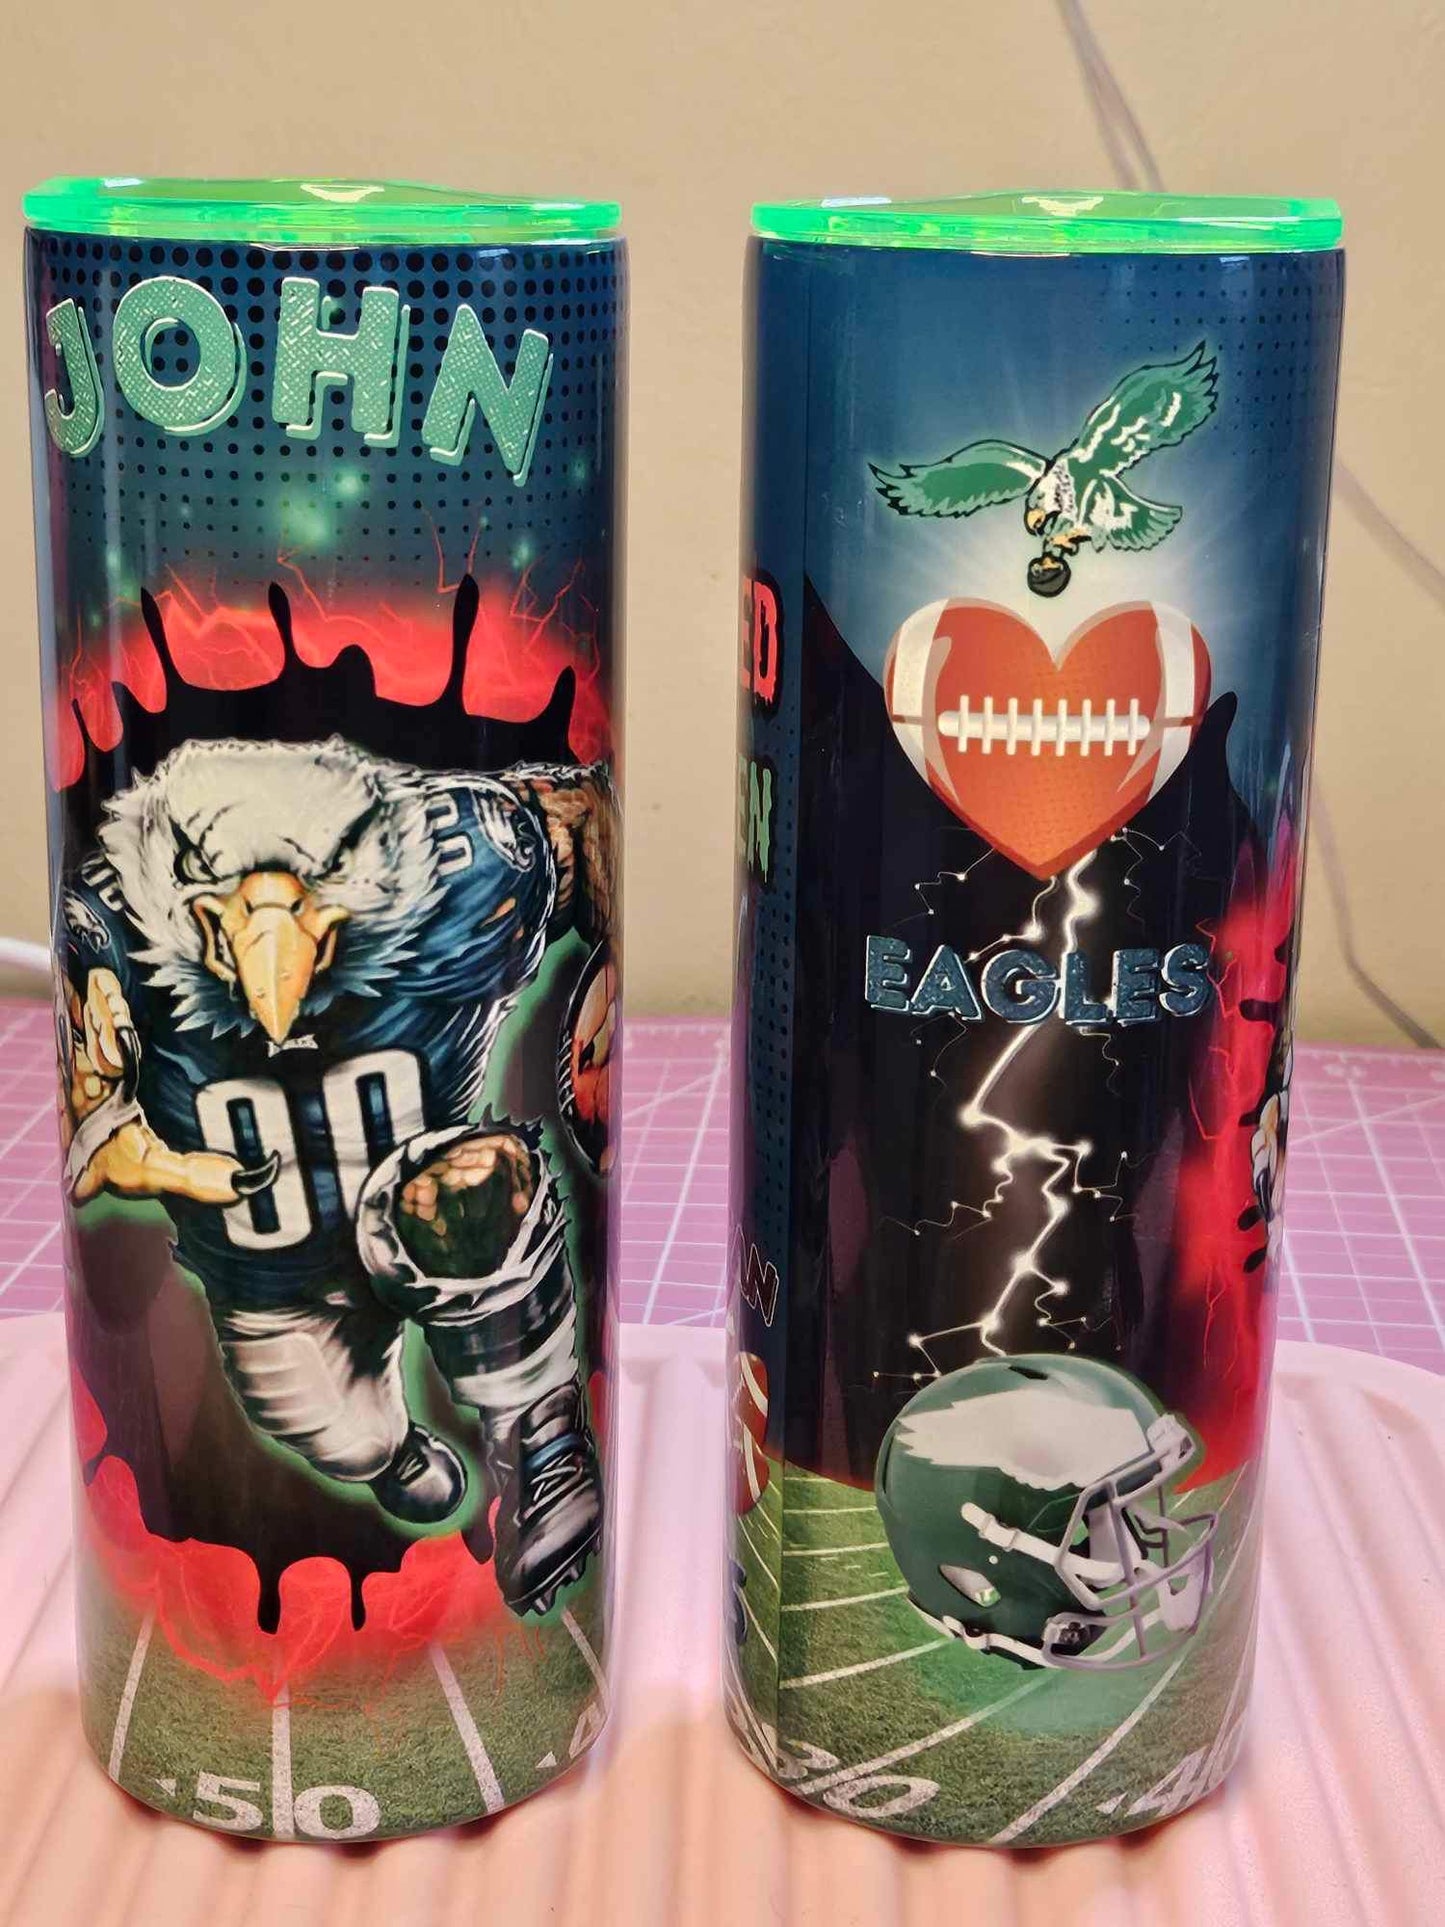 EAGLES 3 different designs (Personalized) 20oz Tumbler w/Metal Straw